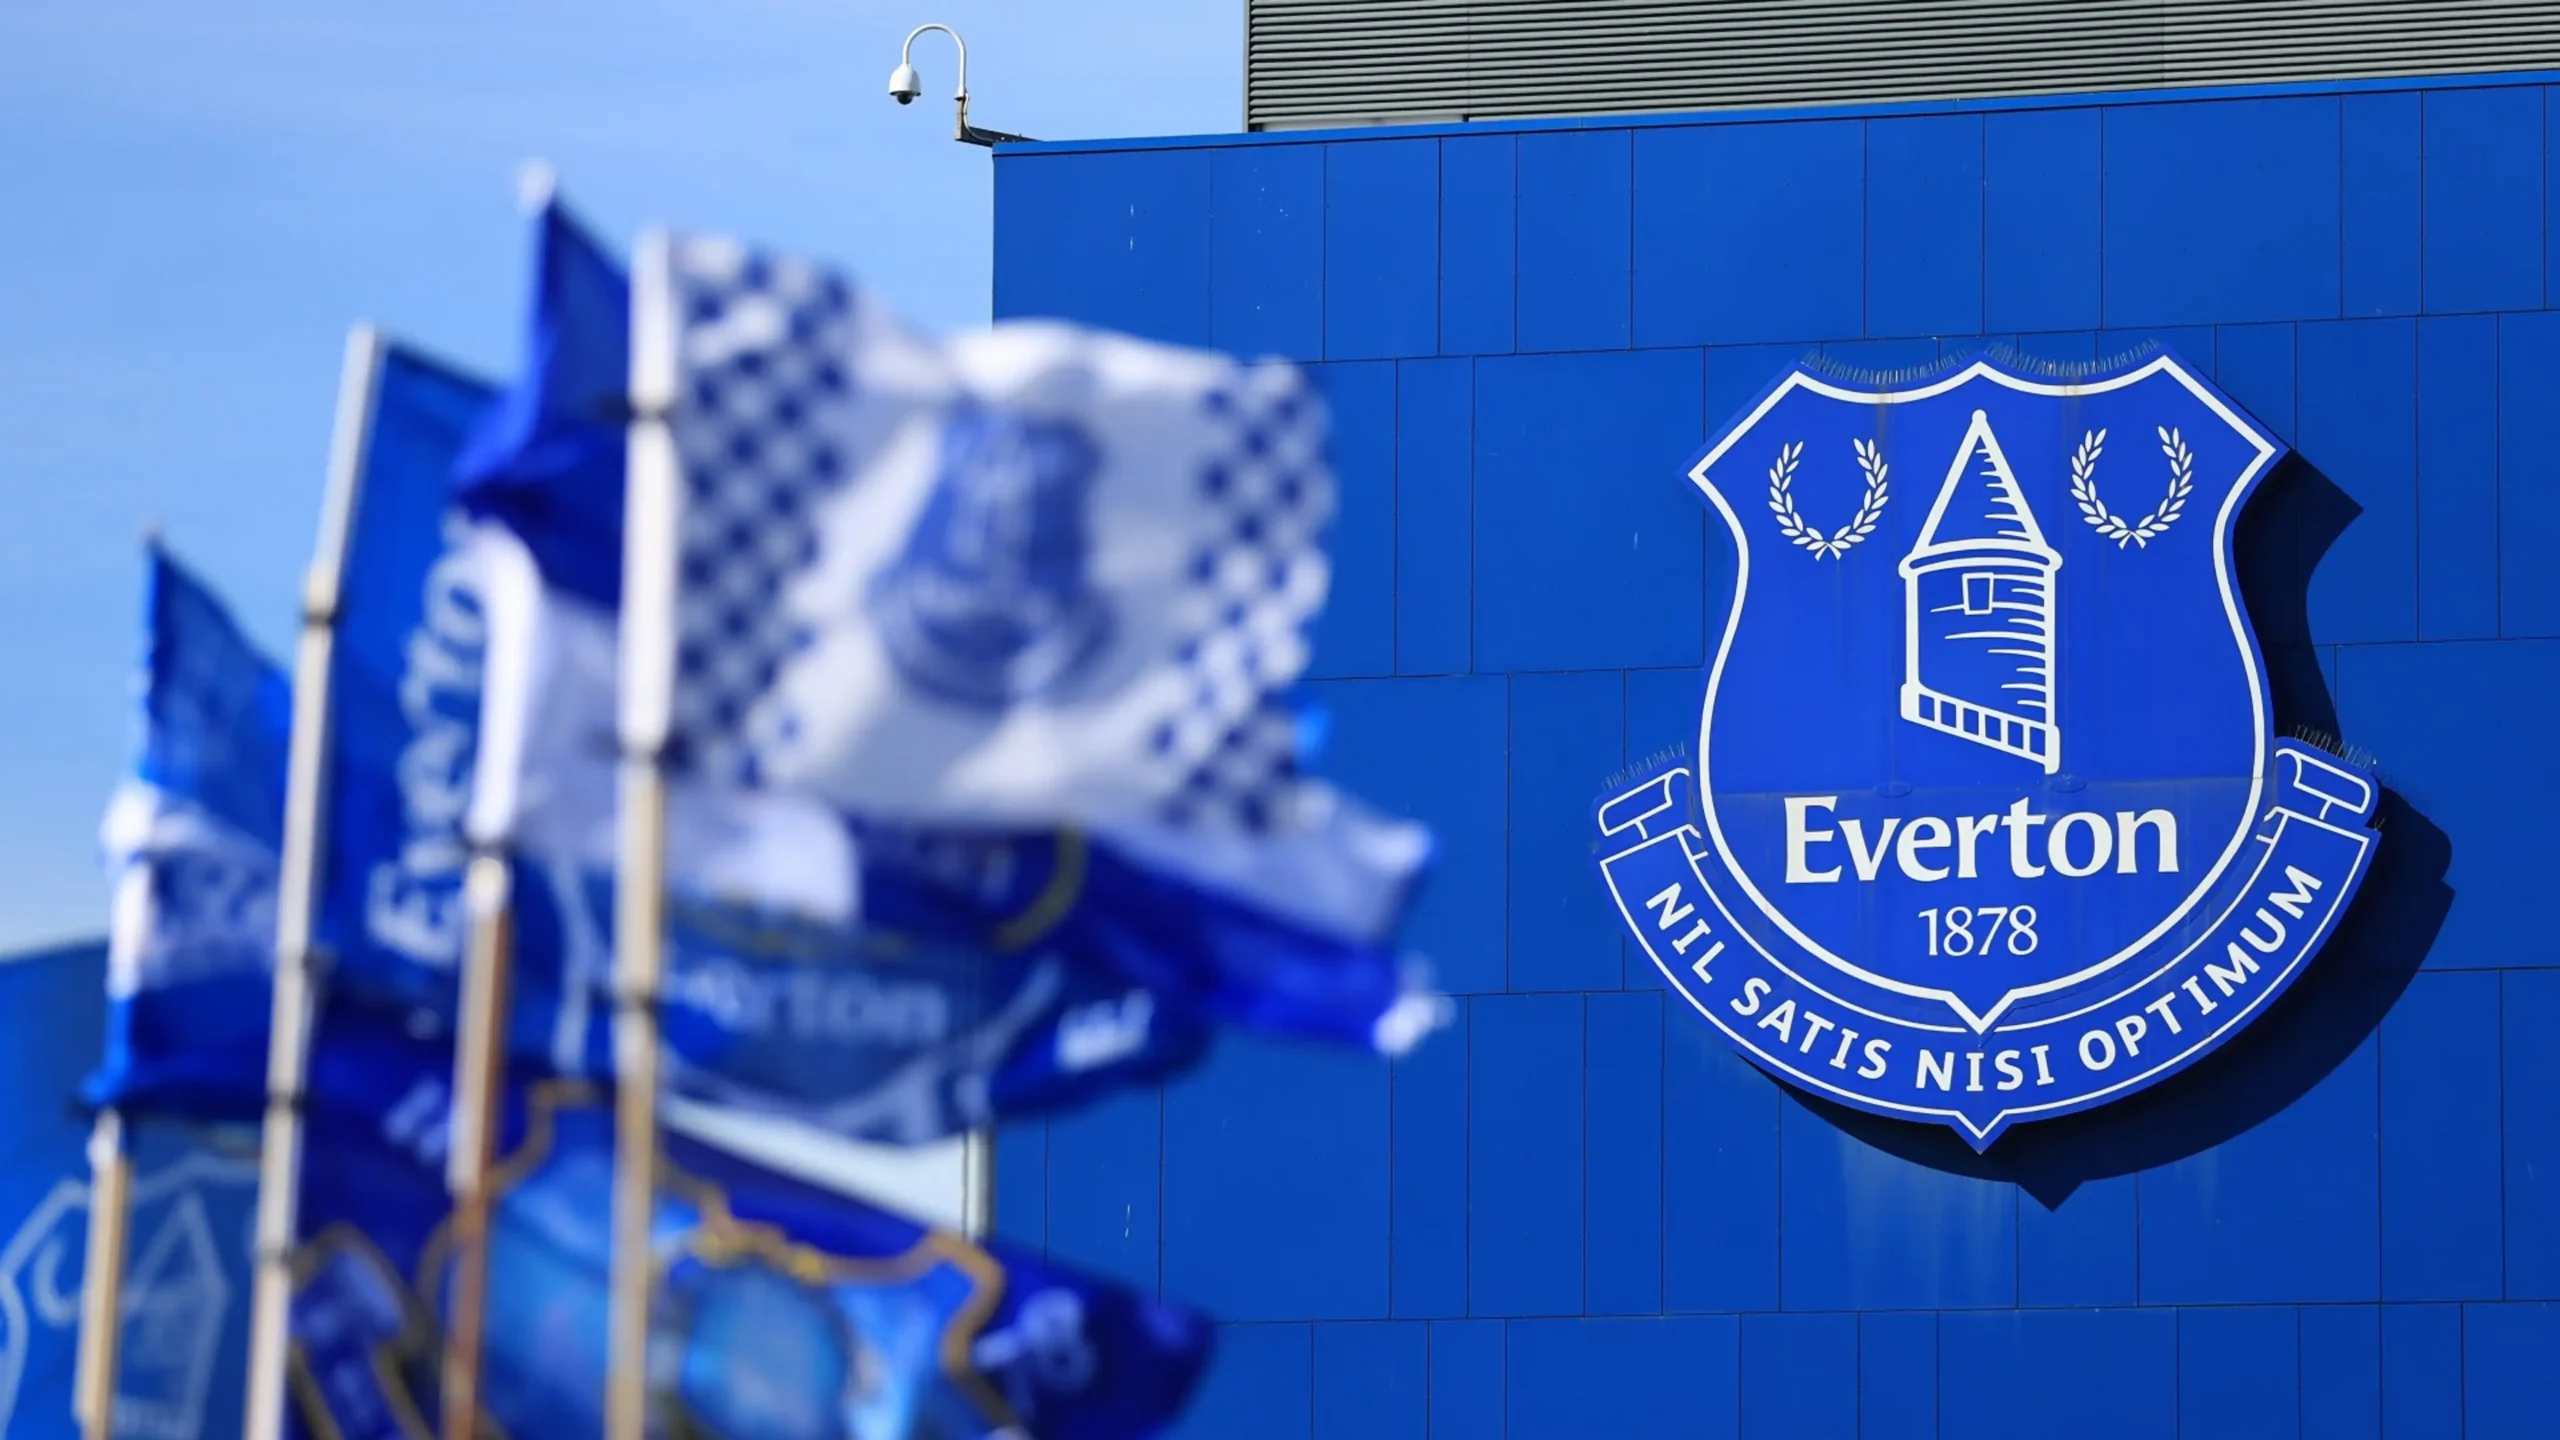 According to BBC report: Everton’s squad for Luton is superstar and new coaching decisions are being made